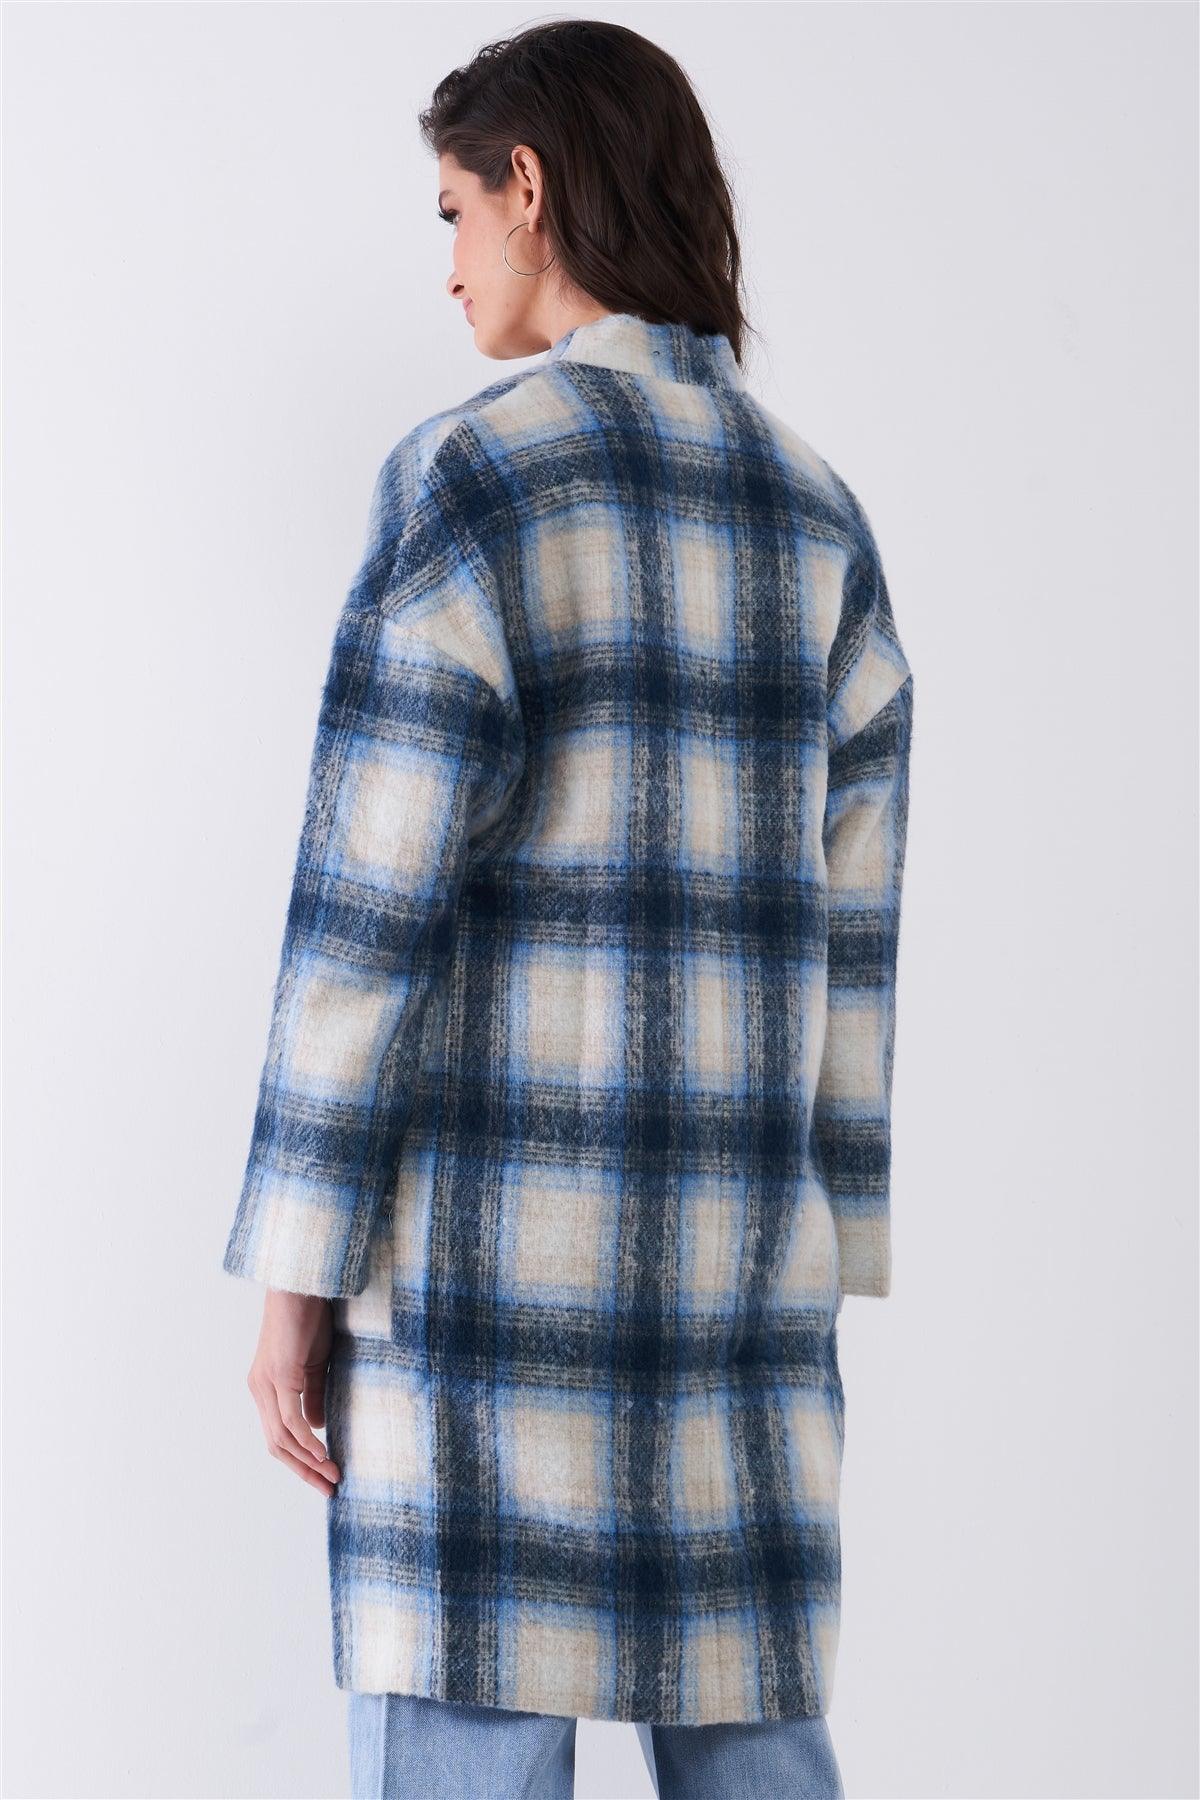 Blue Madras Check Plaid Open Front Long Sleeve Straight Wool Coat Jacket